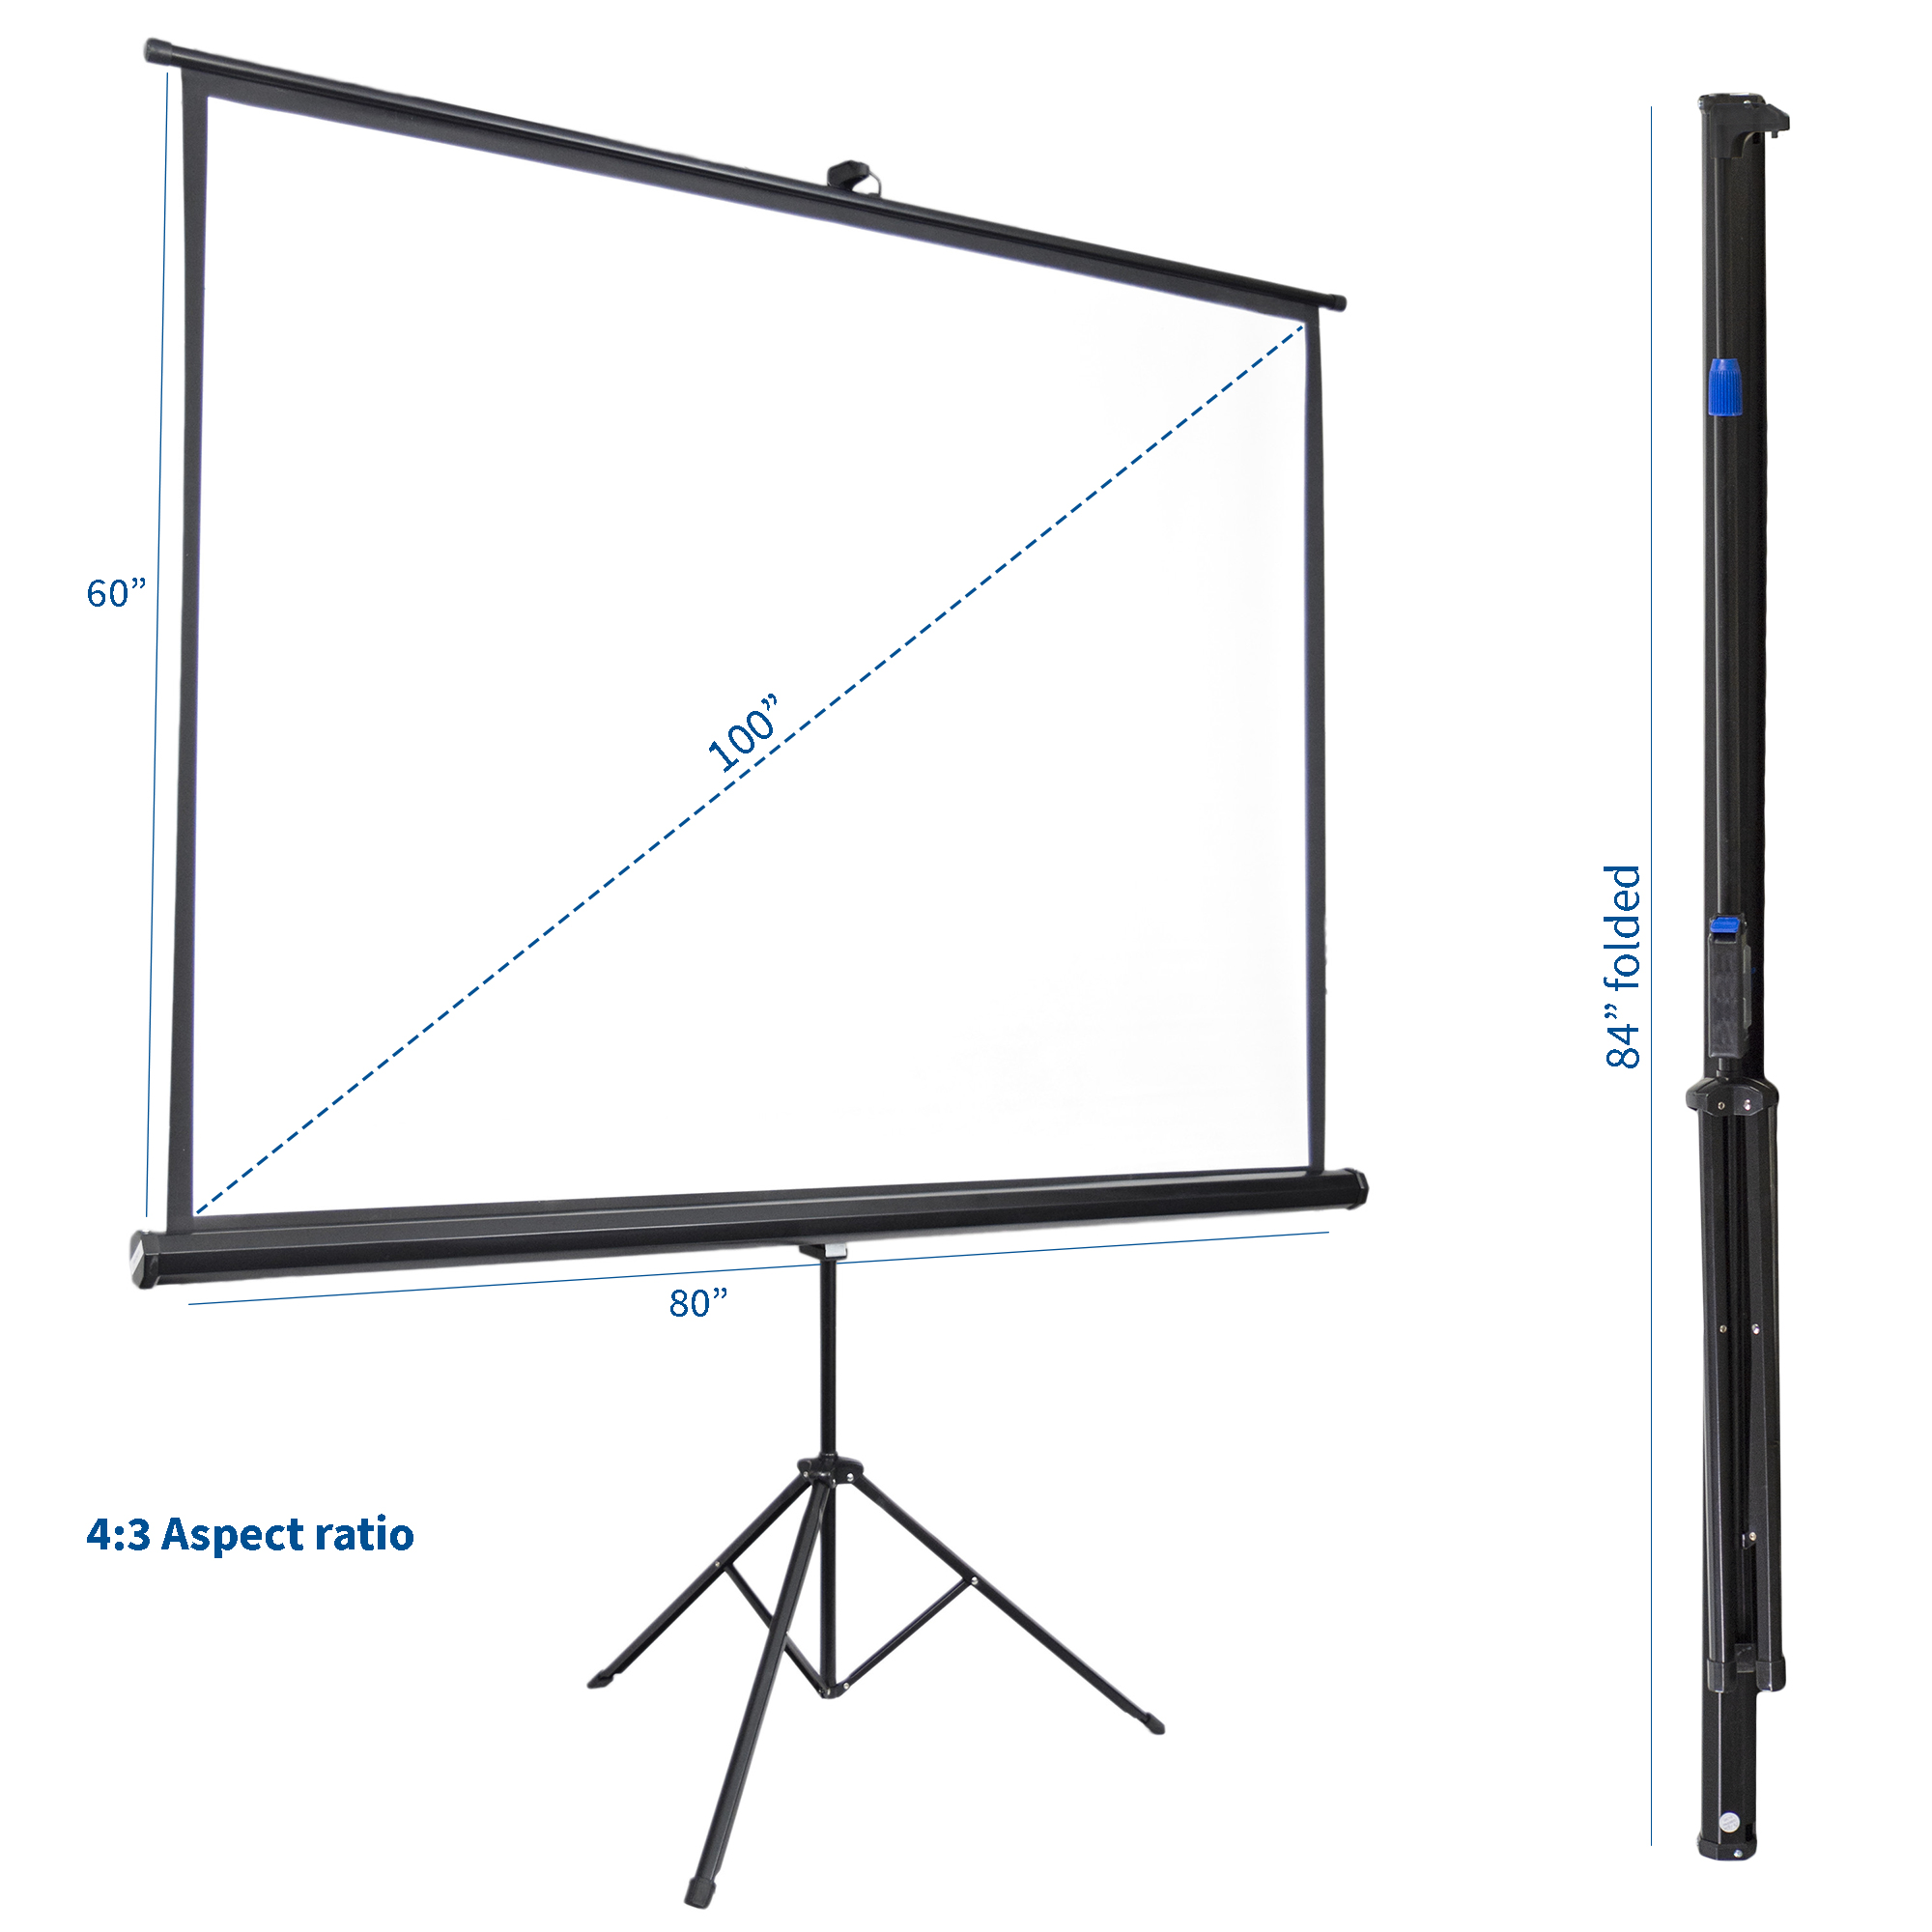 VIVO 100" Portable Projector Screen 4:3 Projection Pull Up Foldable Stand Tripod - image 2 of 6